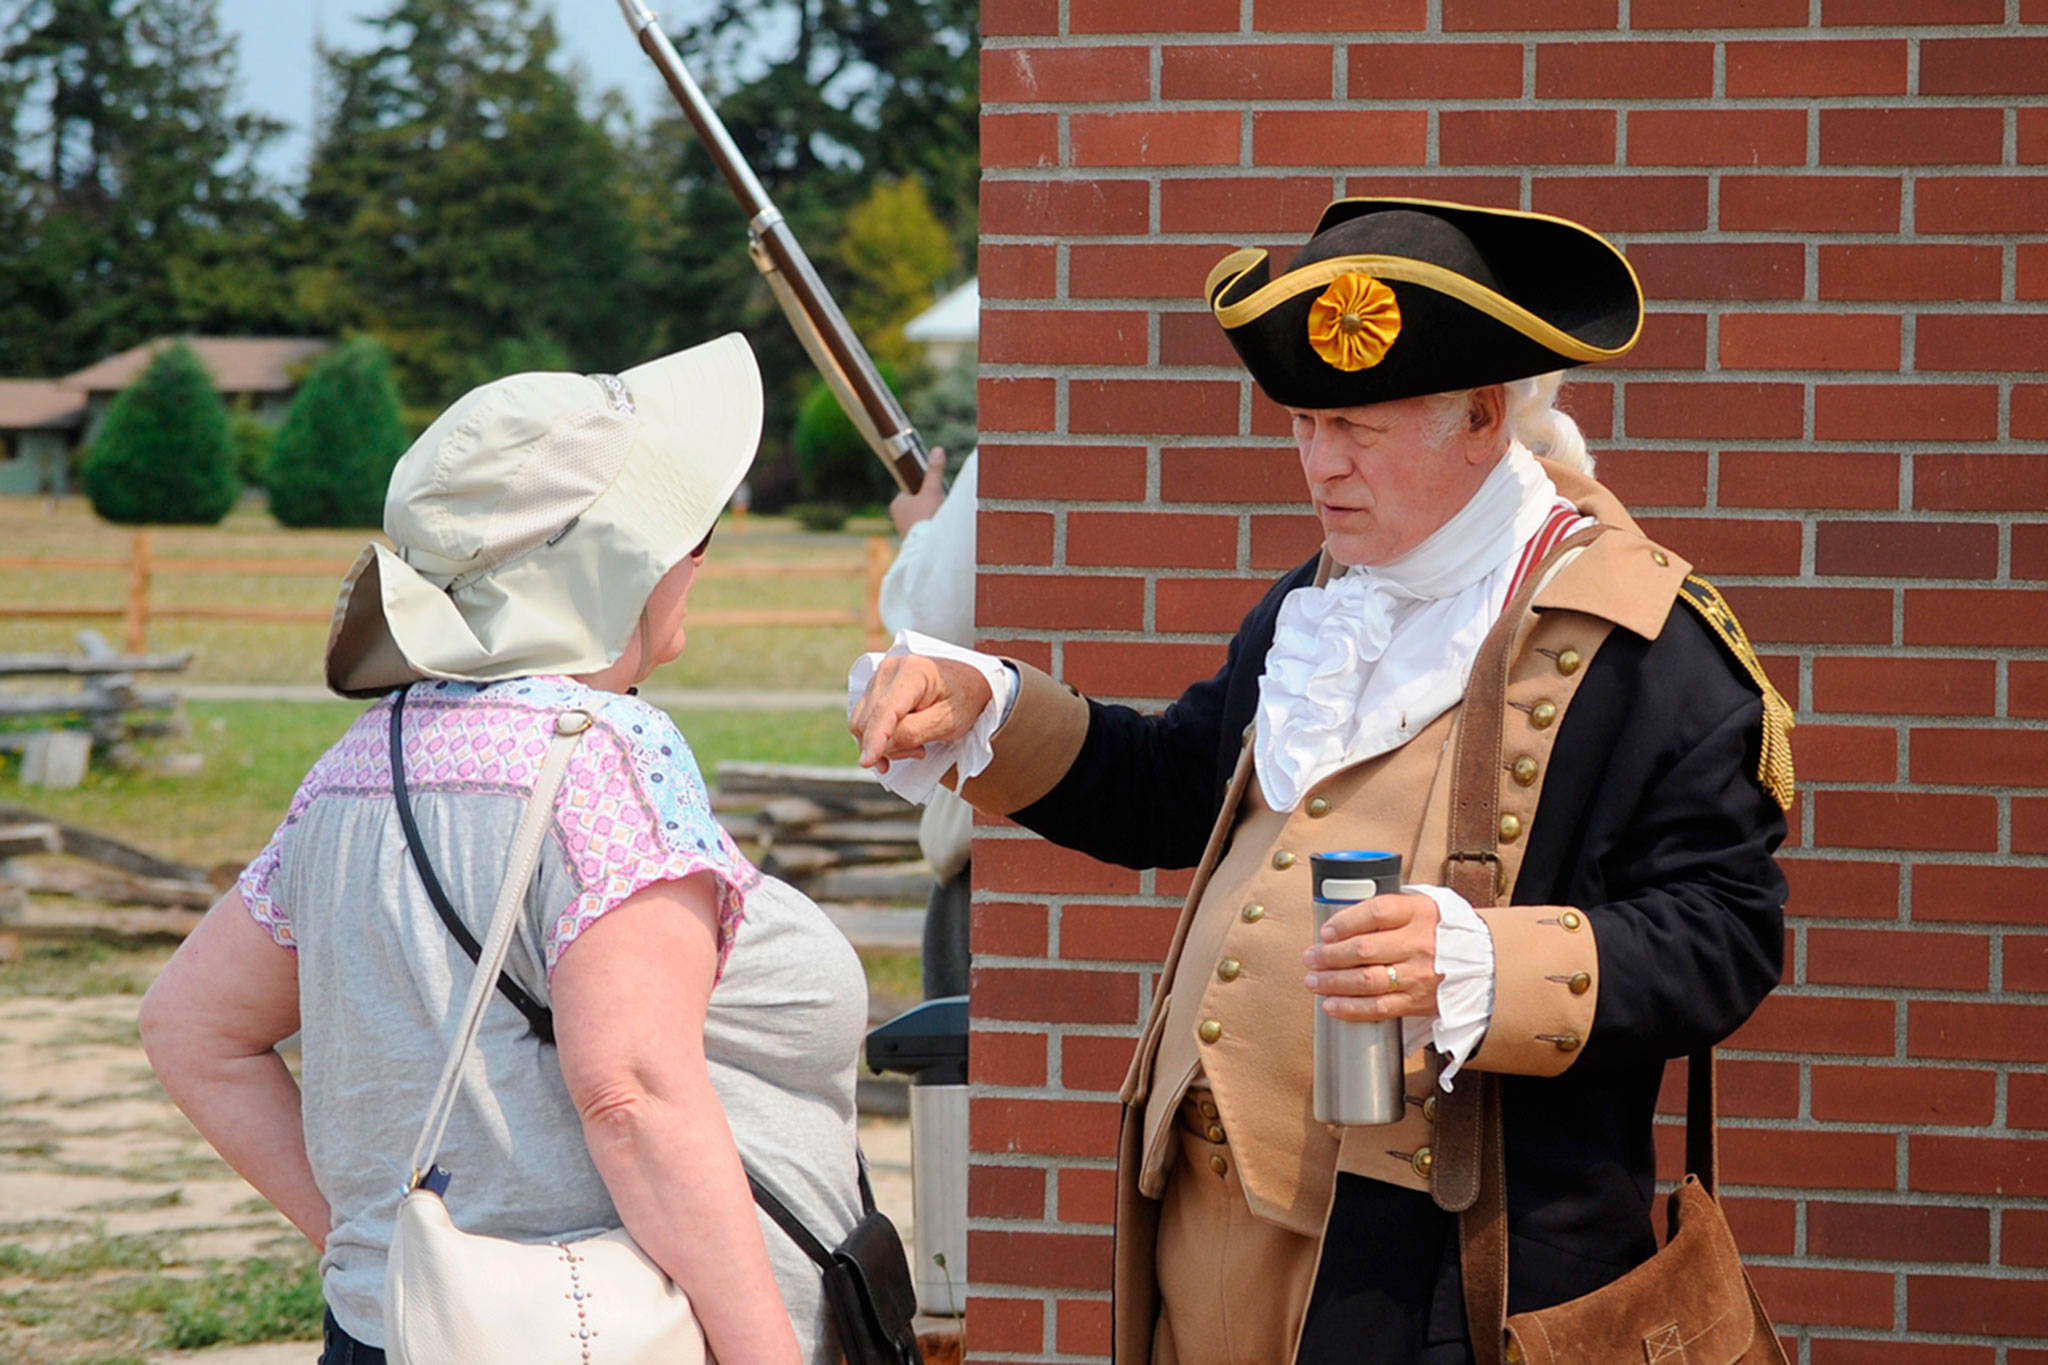 George Washington (Vern Frykholm Jr.) greets visitors Aug. 14 to the Northwest Colonial Festival. Frykholm, a staple of the festival since its inception, said he was happy with the turnout for the event.